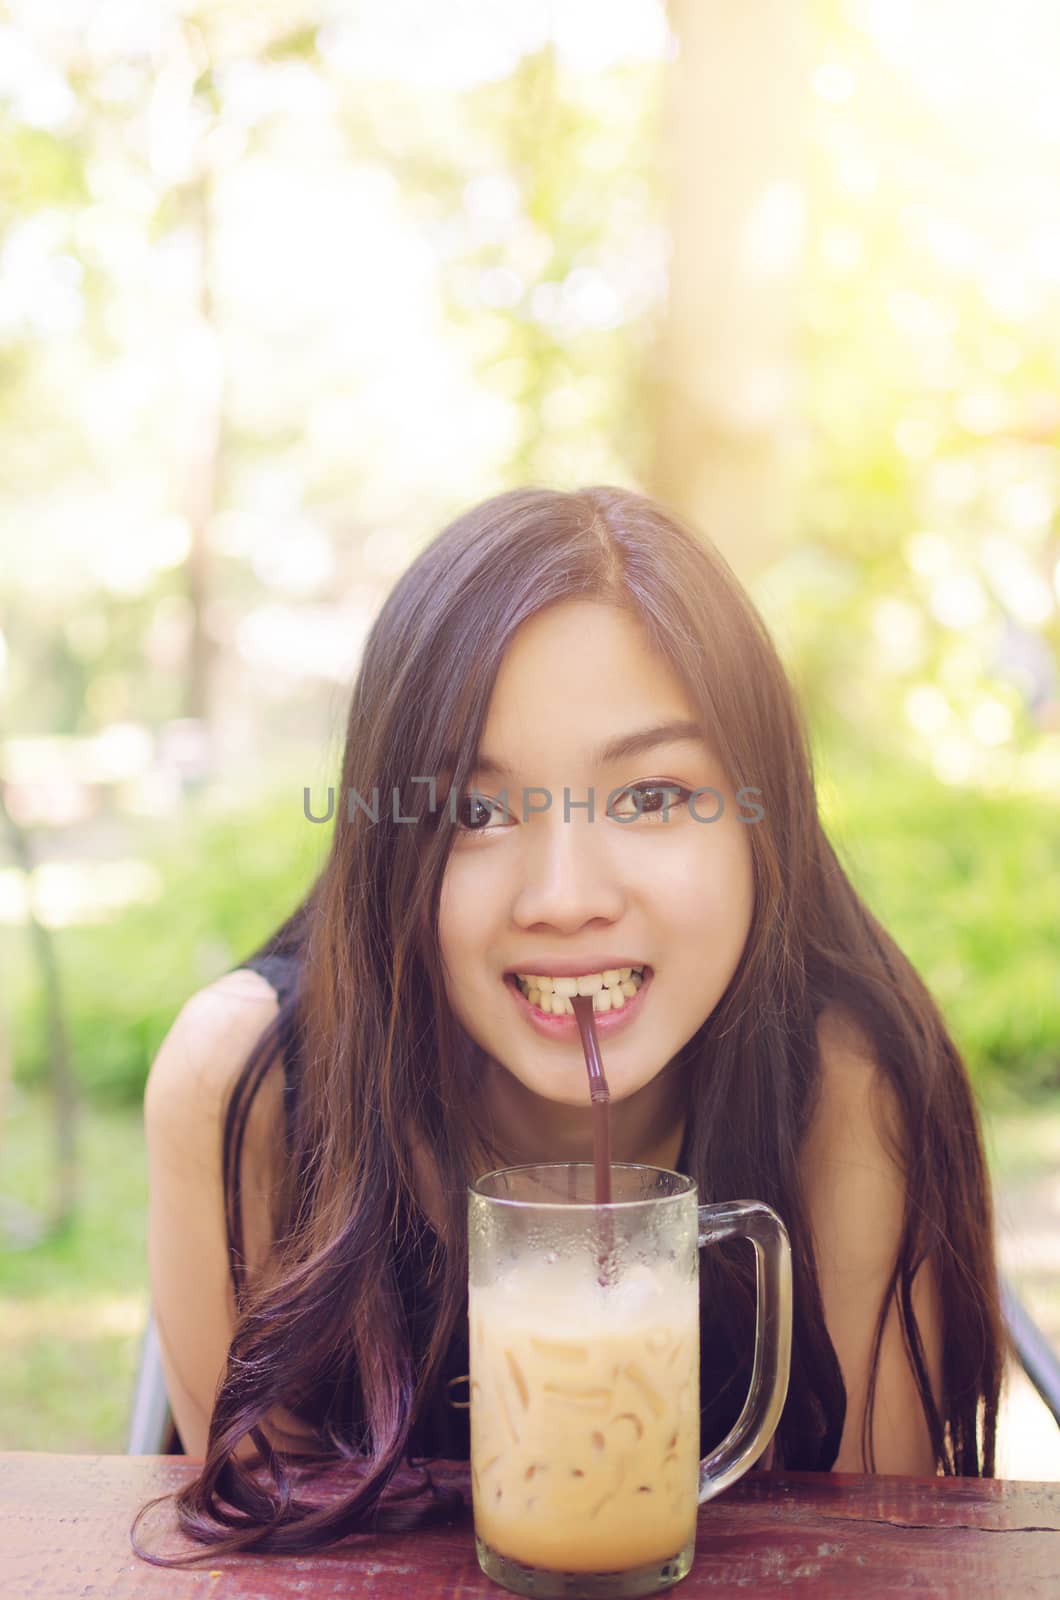 Beautiful asia woman smile and drink coffee. Warm light flare effect on top from the sun.